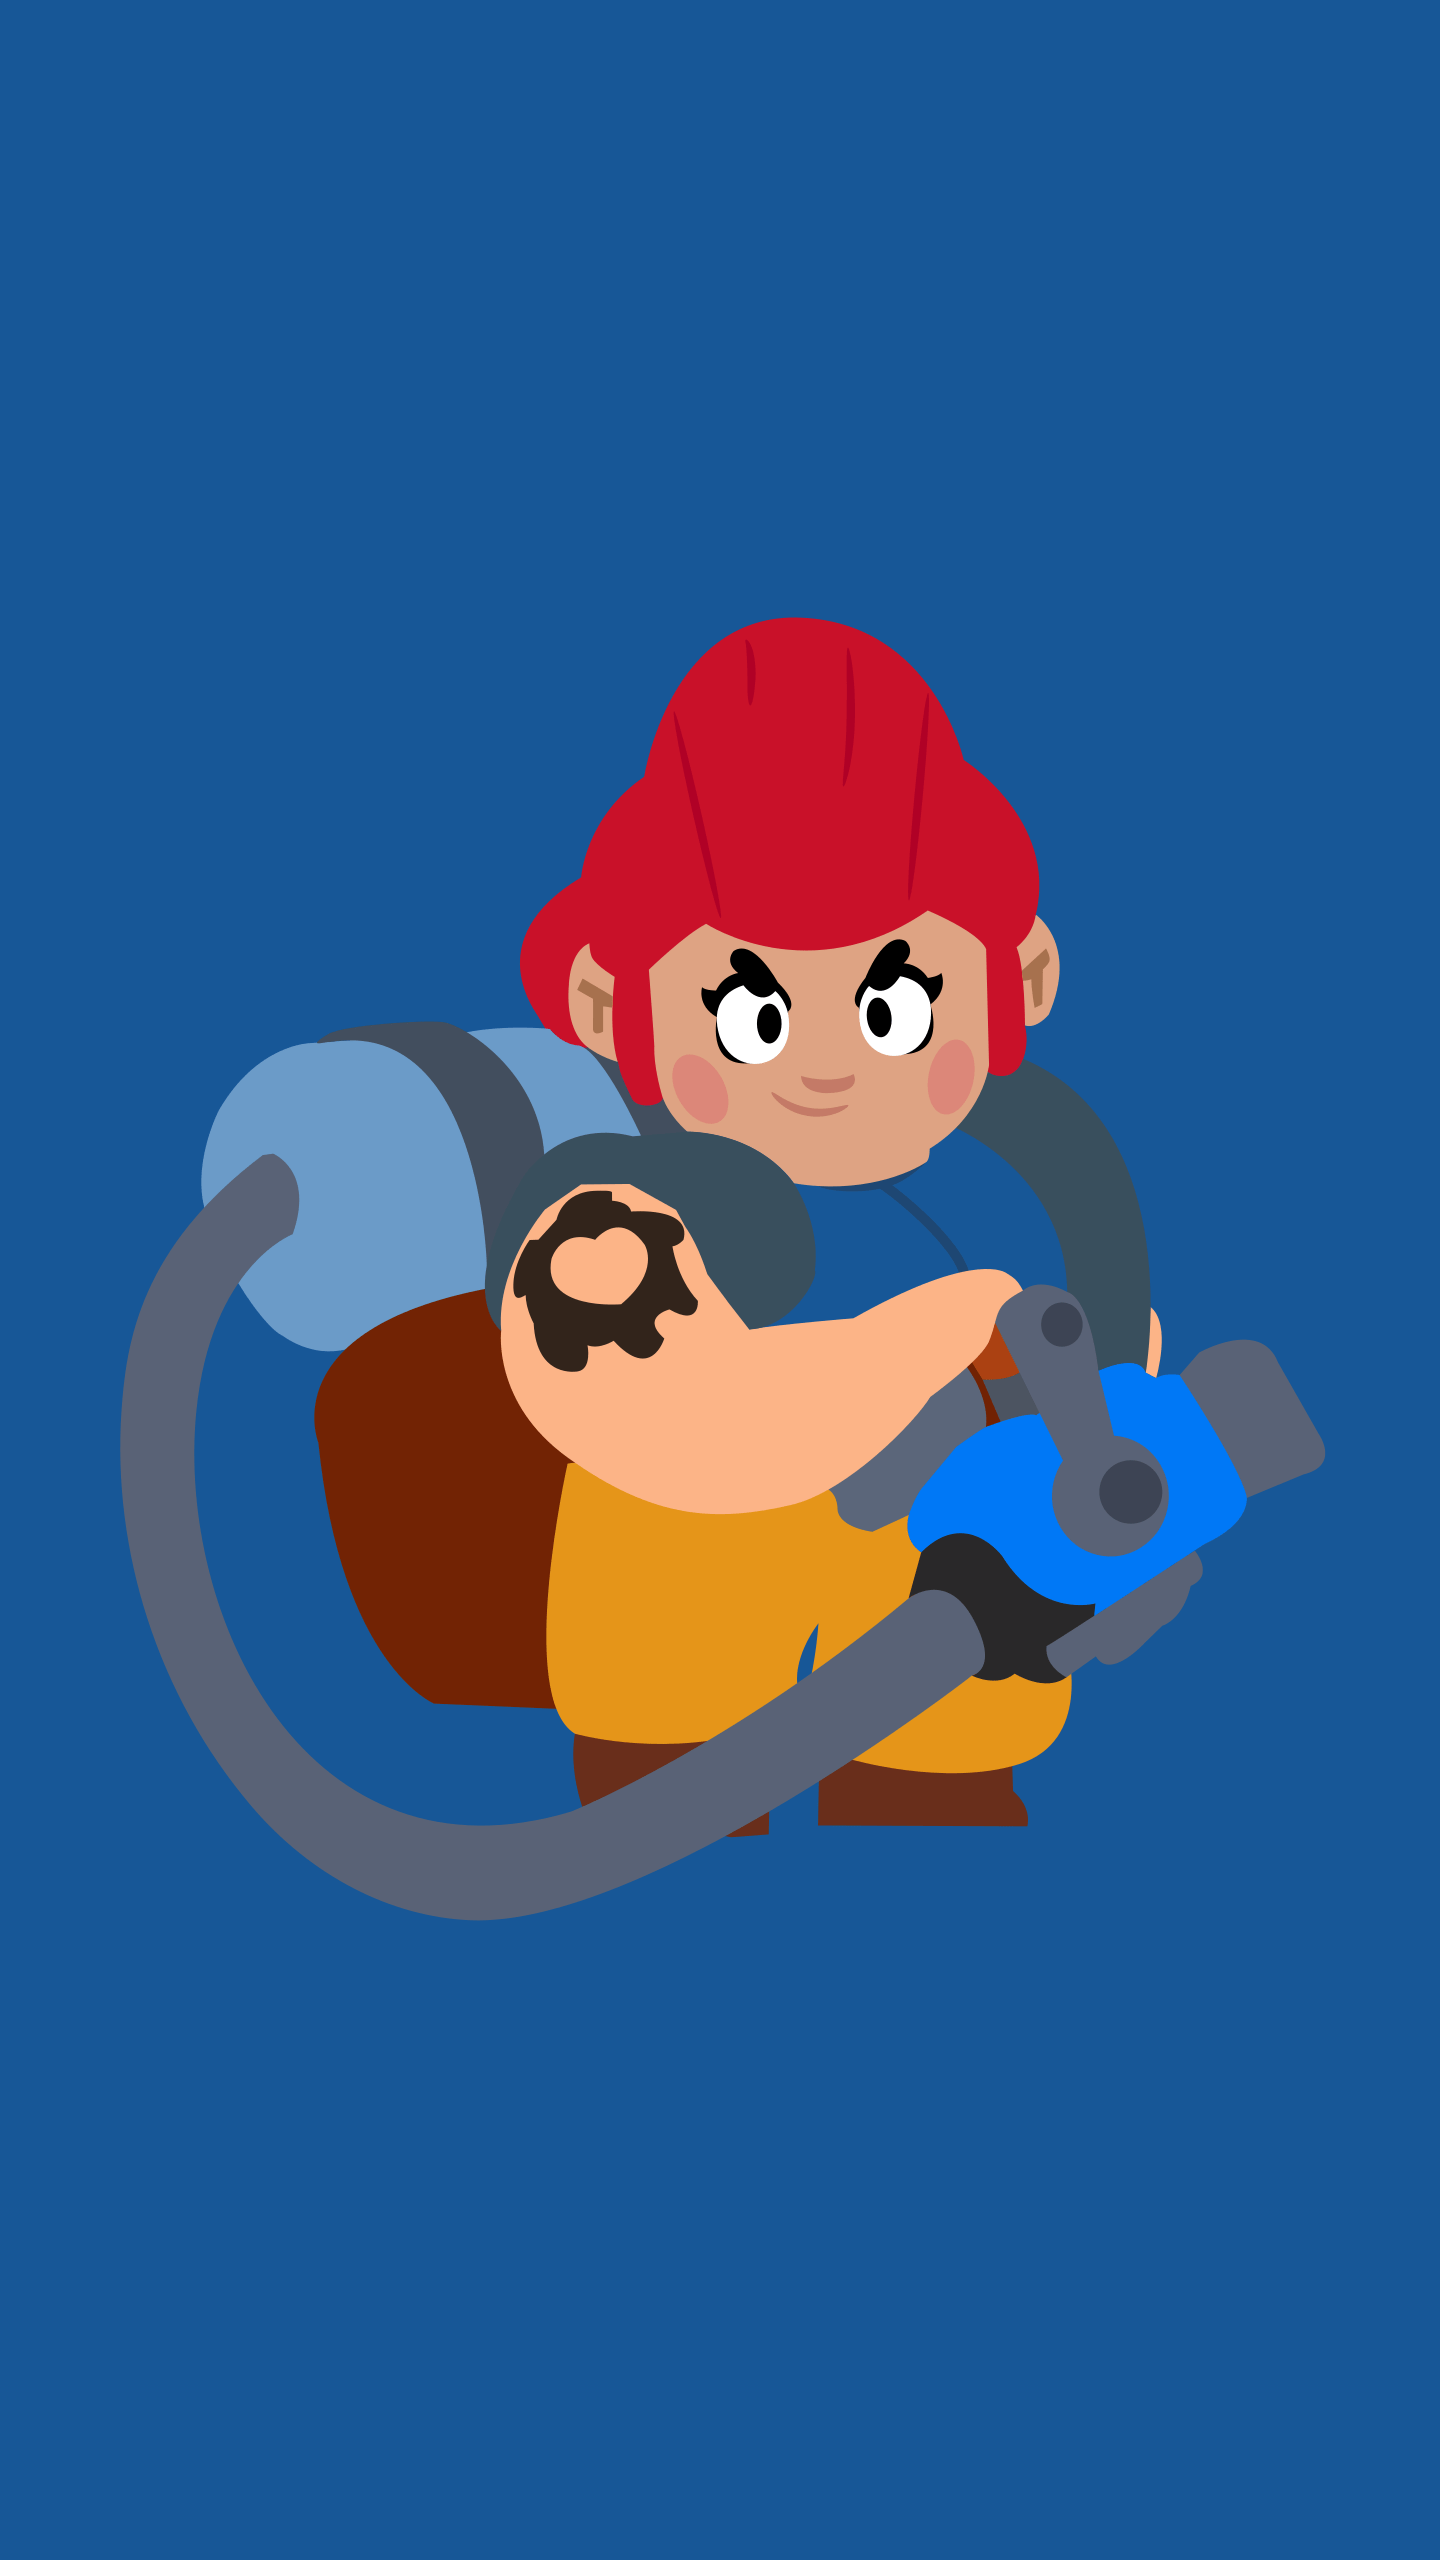 Pam Brawl Stars Wallpapers Top Free Pam Brawl Stars Backgrounds Wallpaperaccess - how old is pam in brawl stars